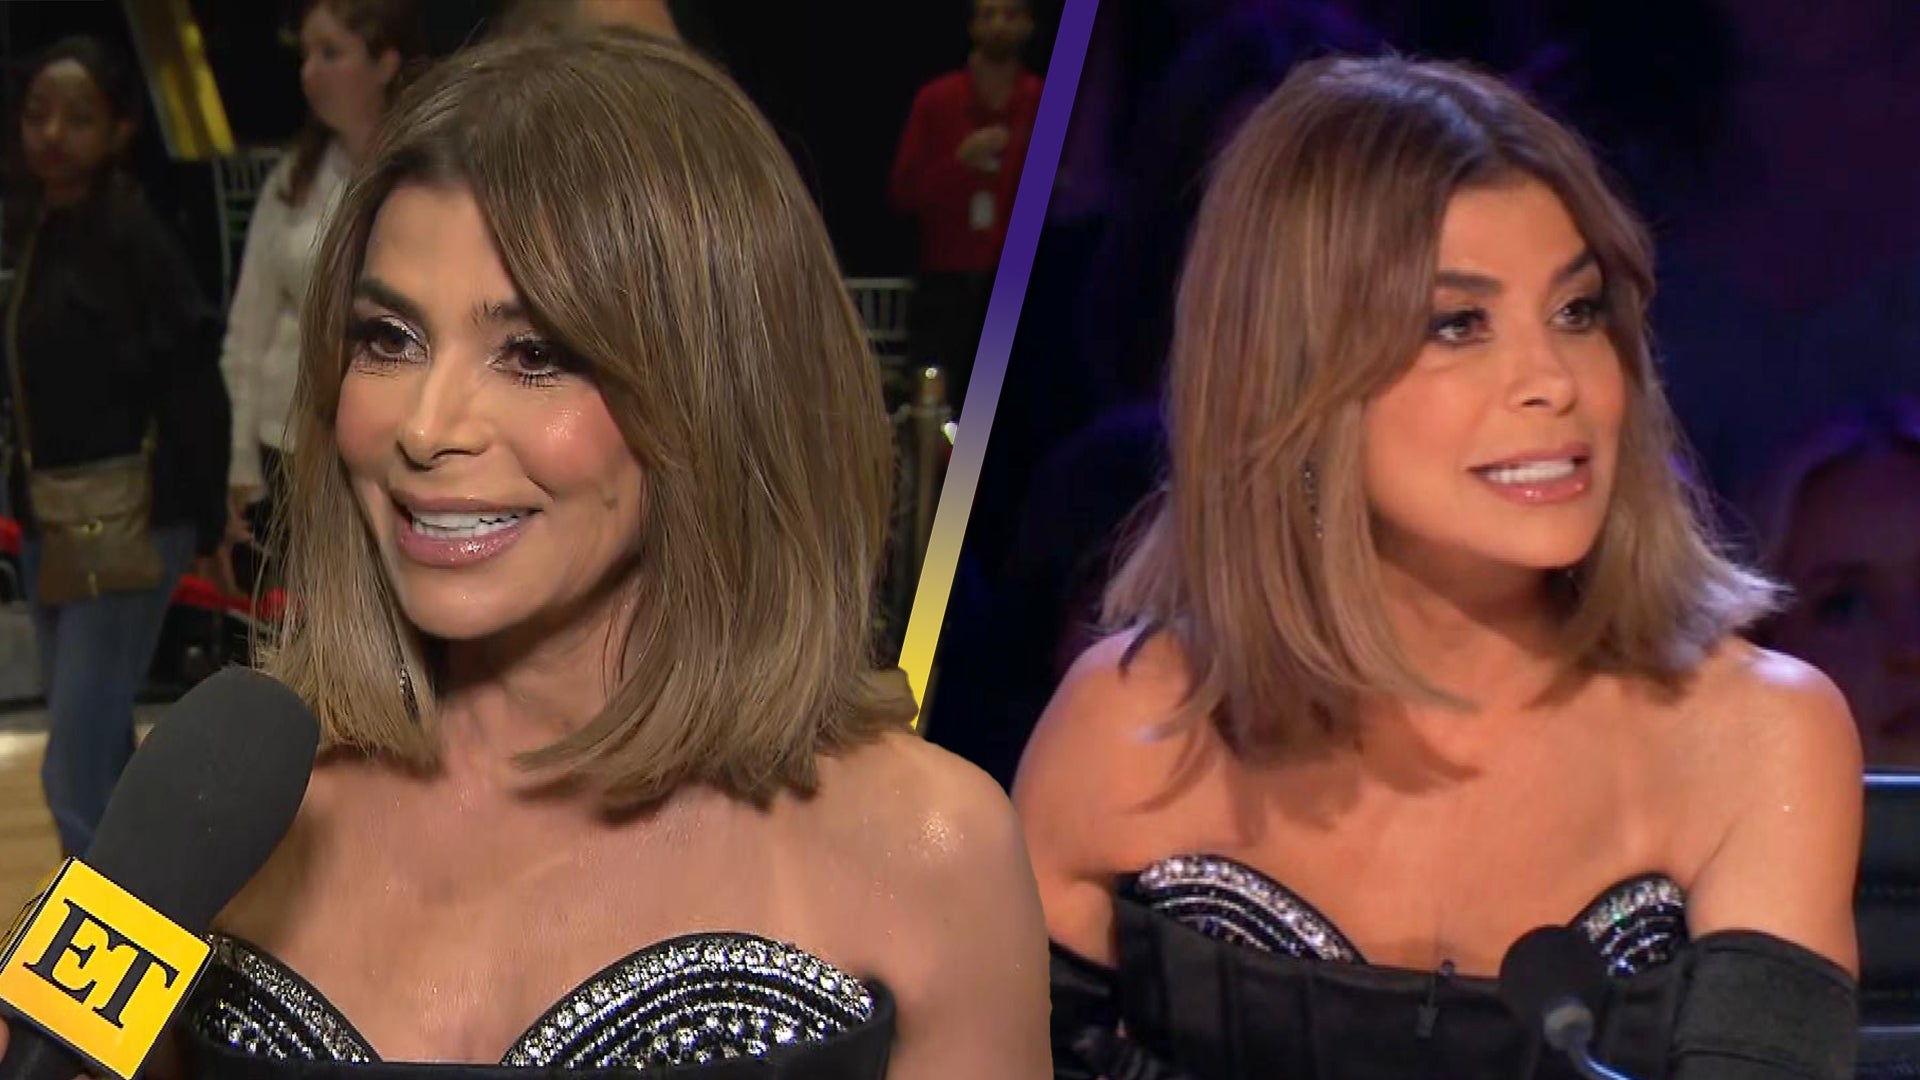 Paula Abdul on Feeling 'Back in Her Element' Returning to 'DWTS' as Guest Judge (Exclusive) 